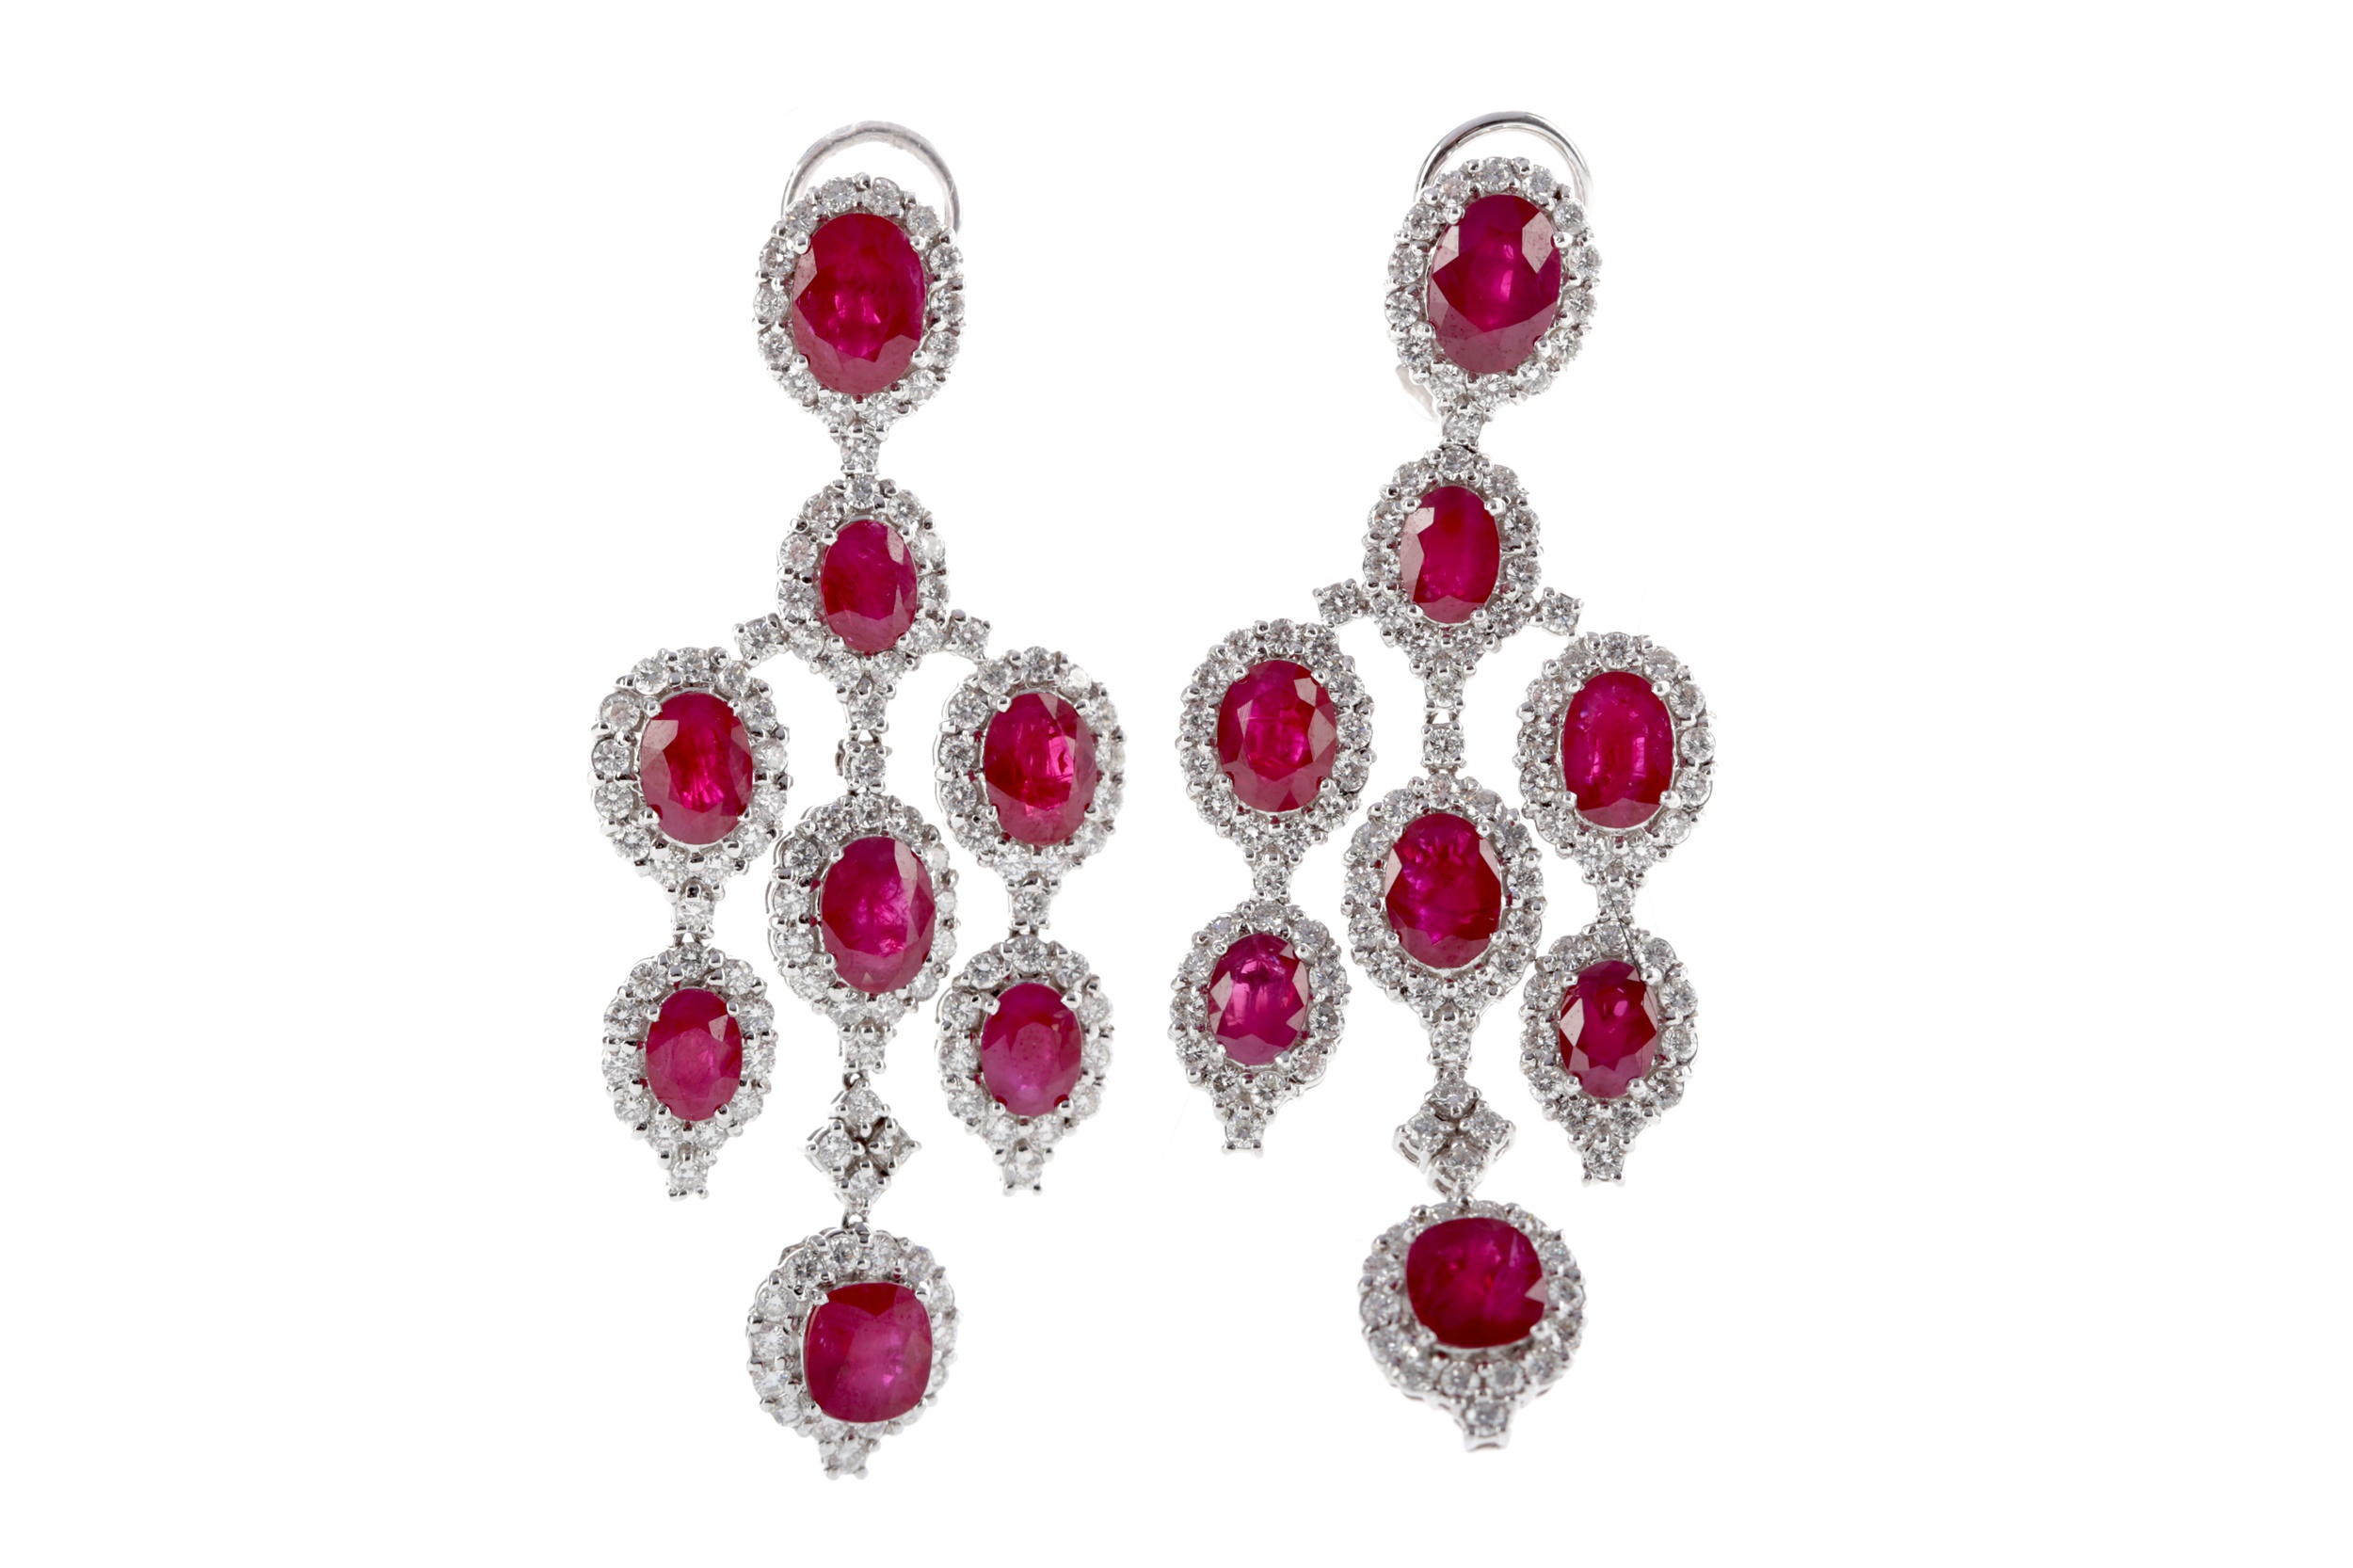 A PAIR OF RUBY AND DIAMOND CHANDELIER EARRINGS